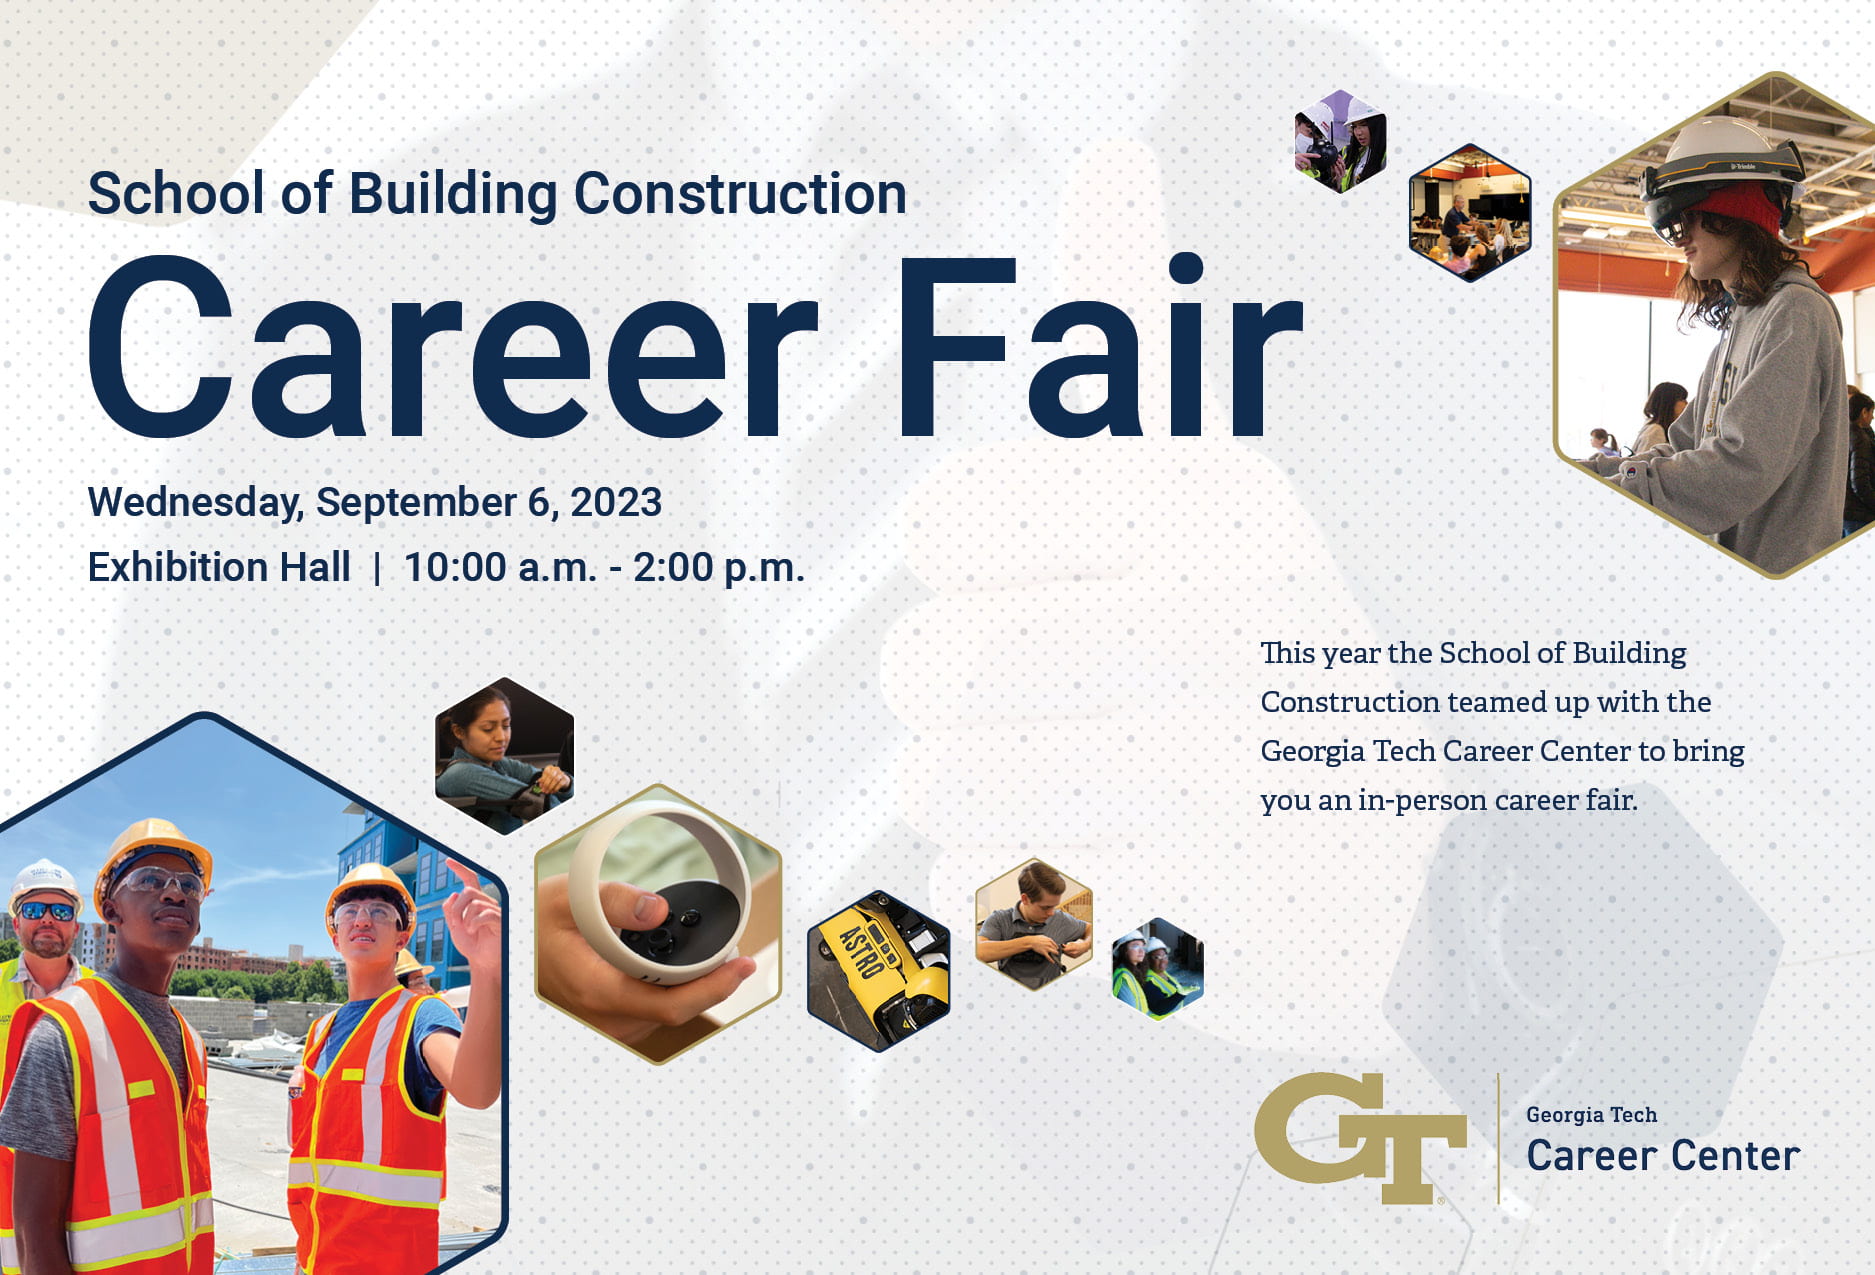 College of Building Construction Fair mural